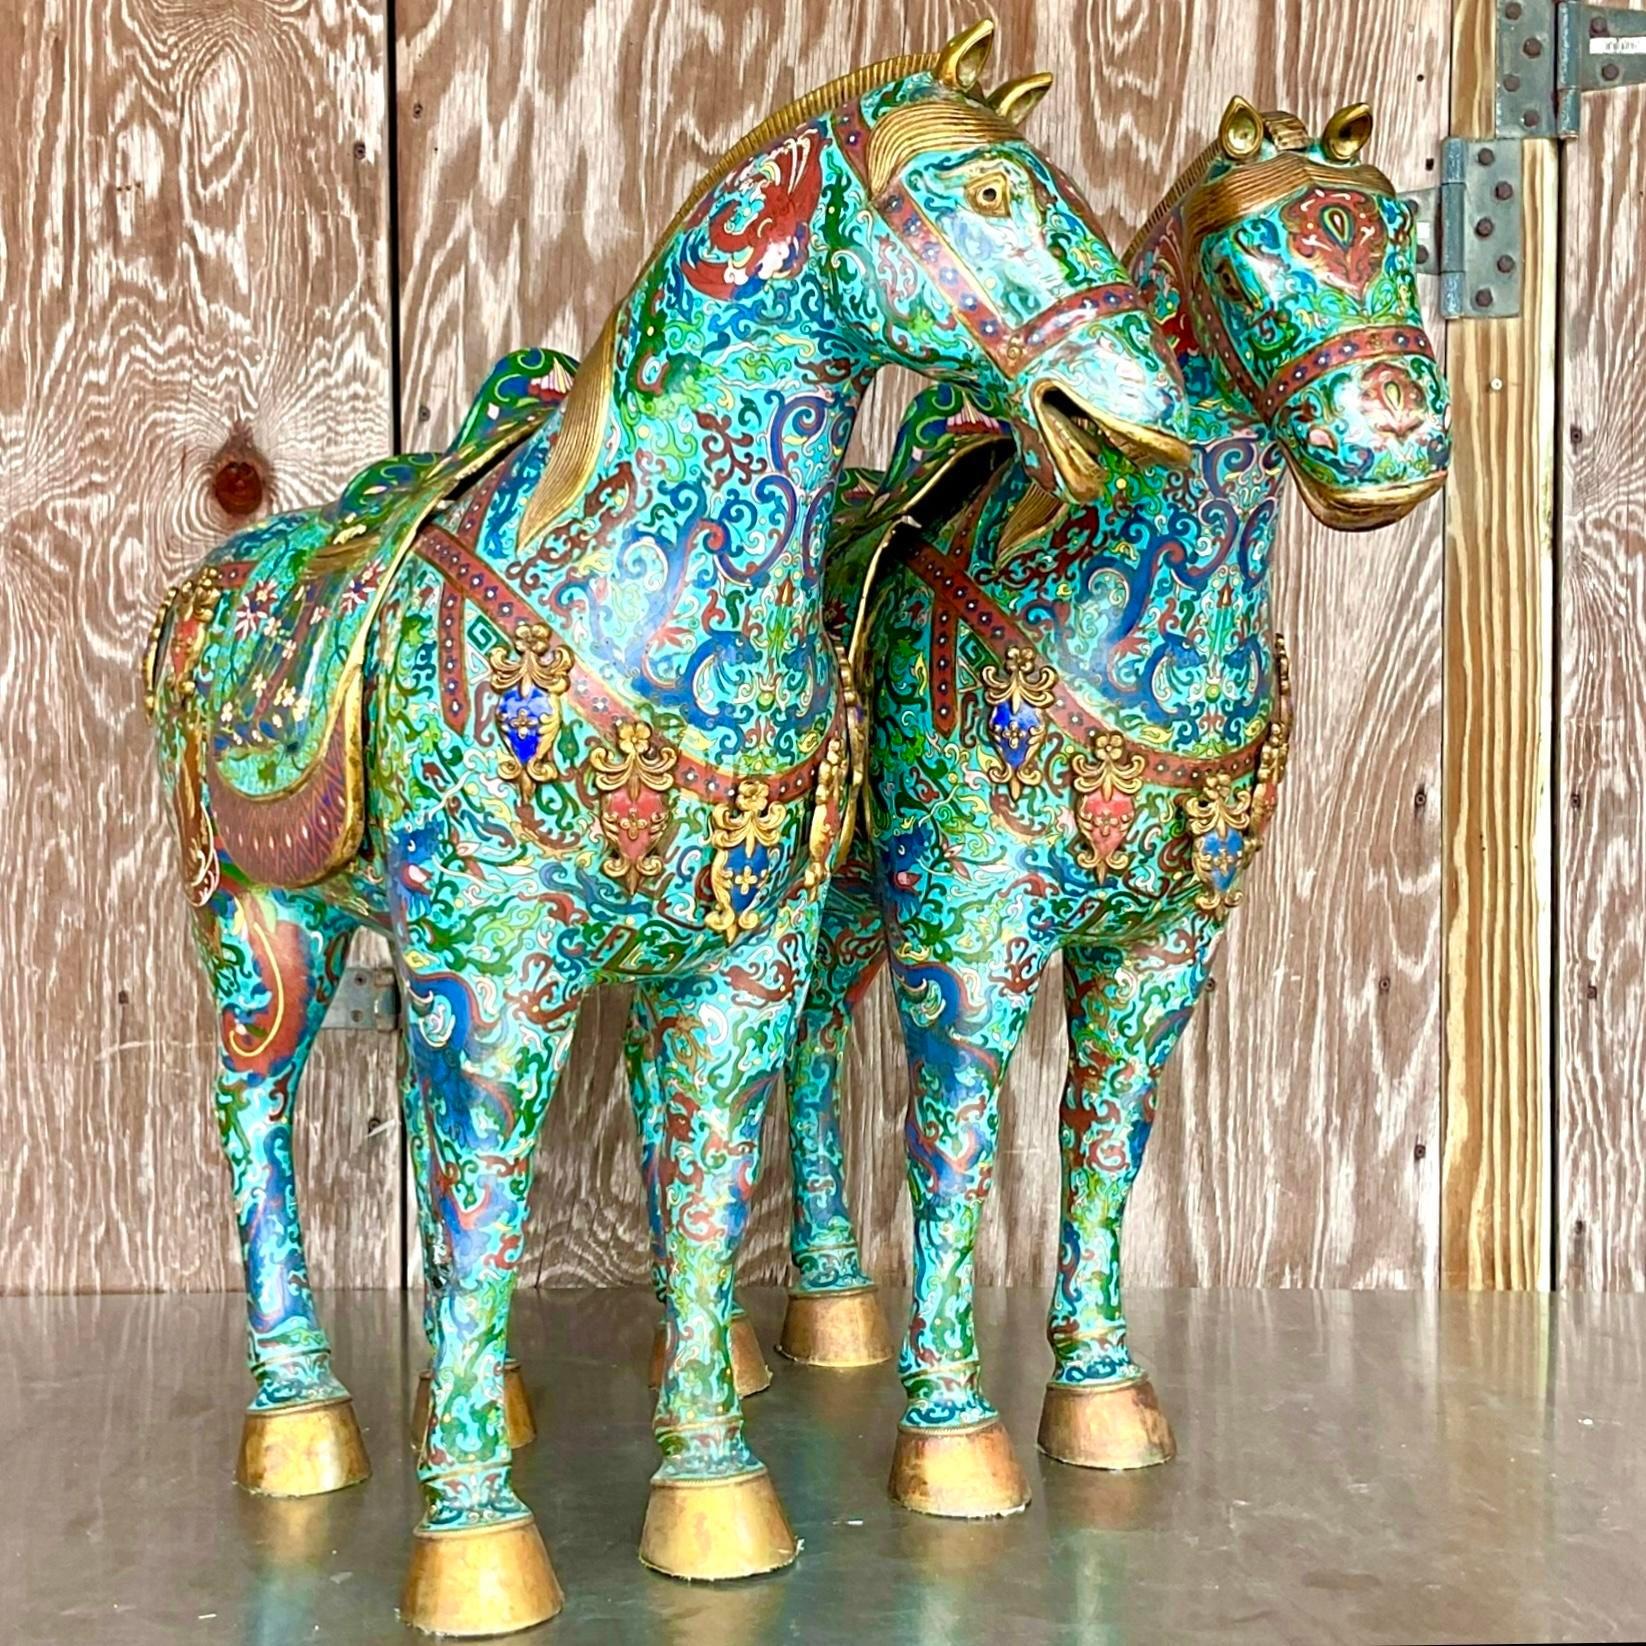 Chinese Vintage Asian Monumental Cloisonné Enameled Horses - a Pair For Sale